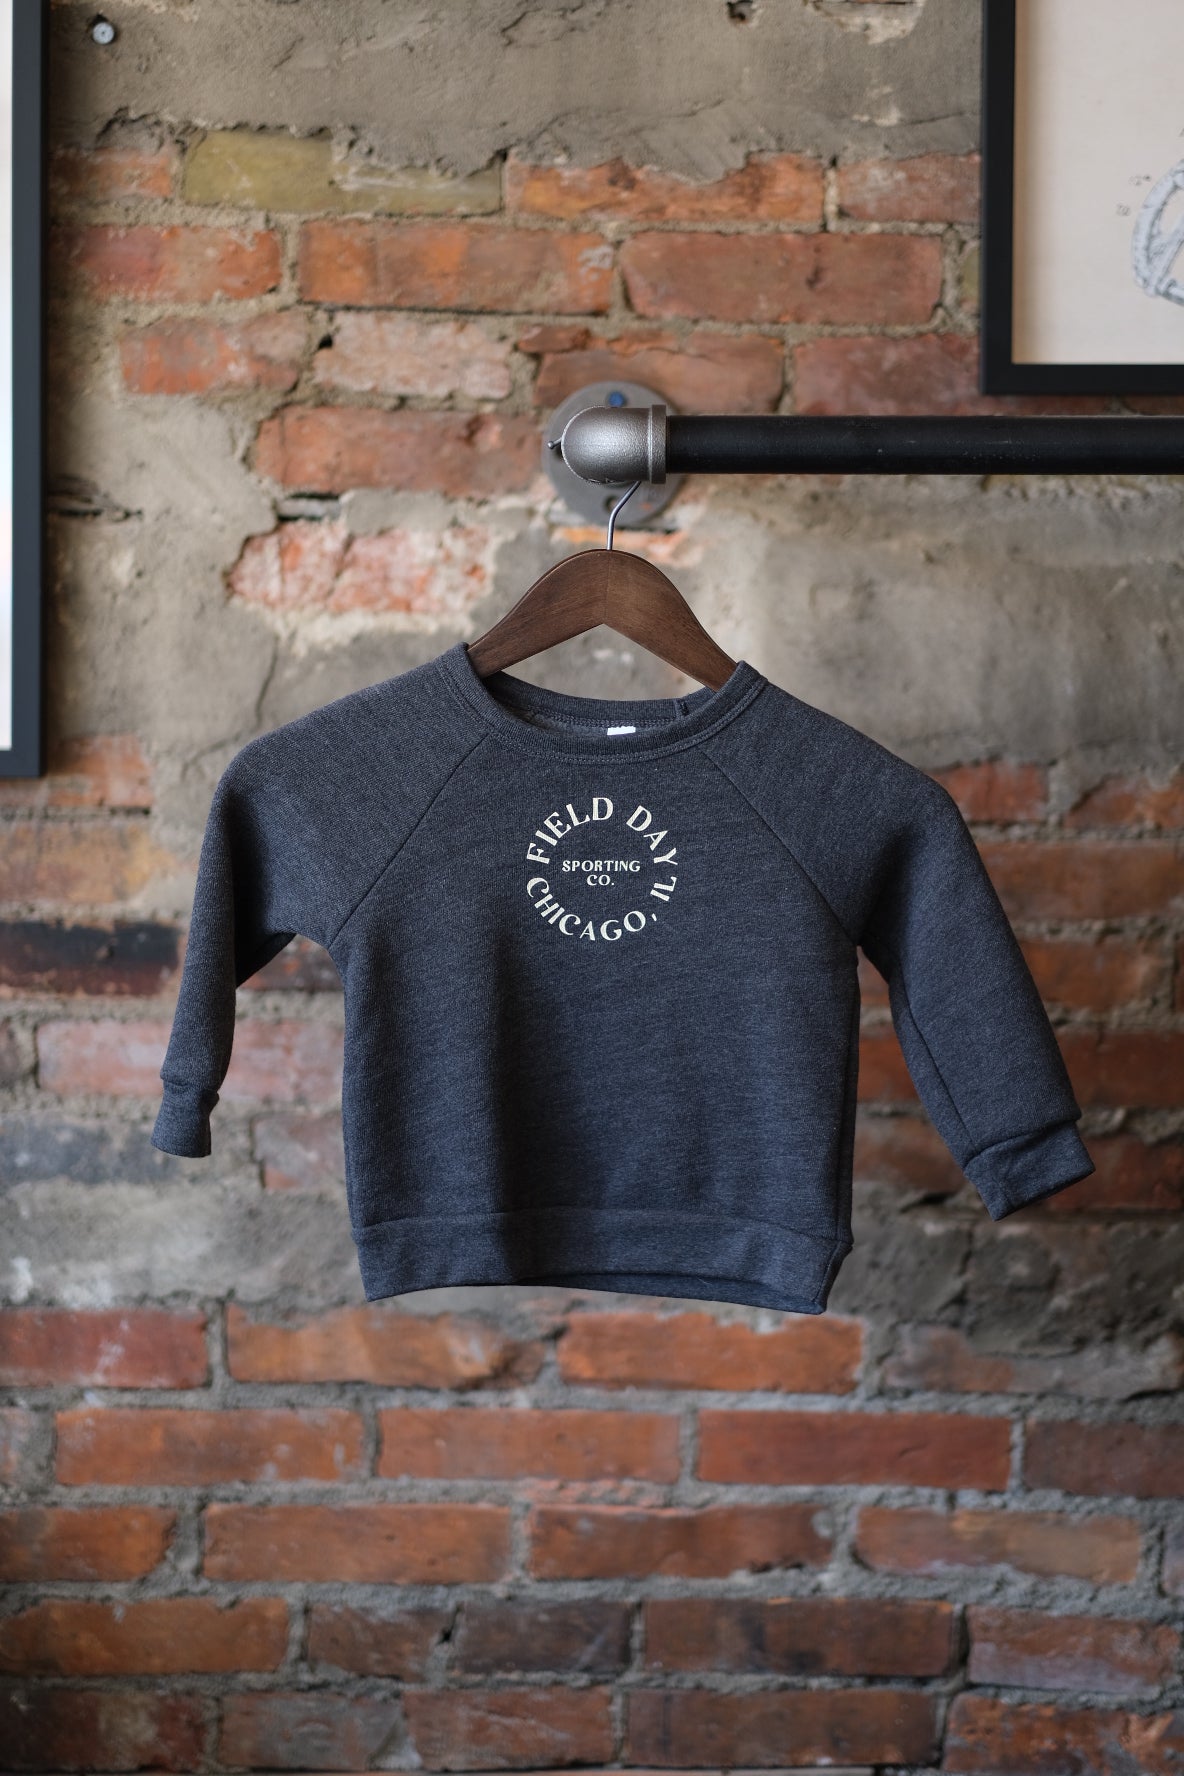 Toddler Sporting Co. Crew - Charcoal